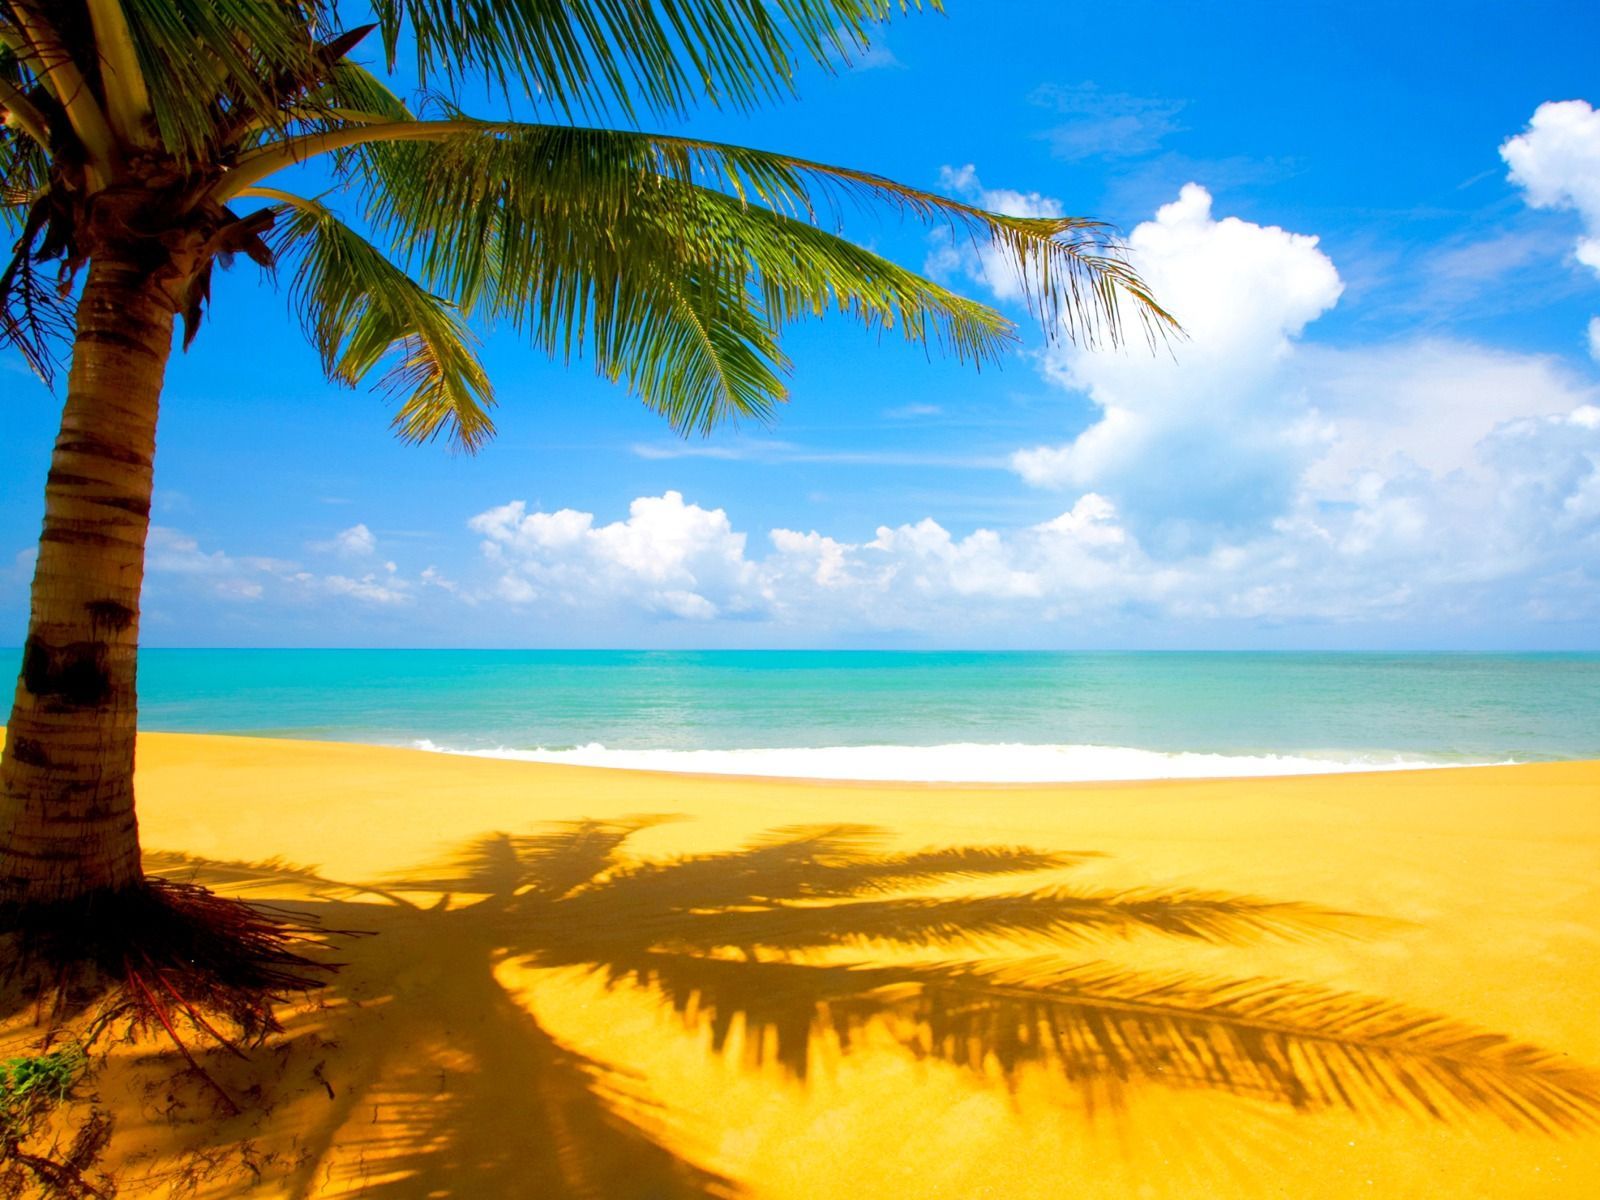 Beaches-desktop-new-wallpapers-for-background-free-download.jpg